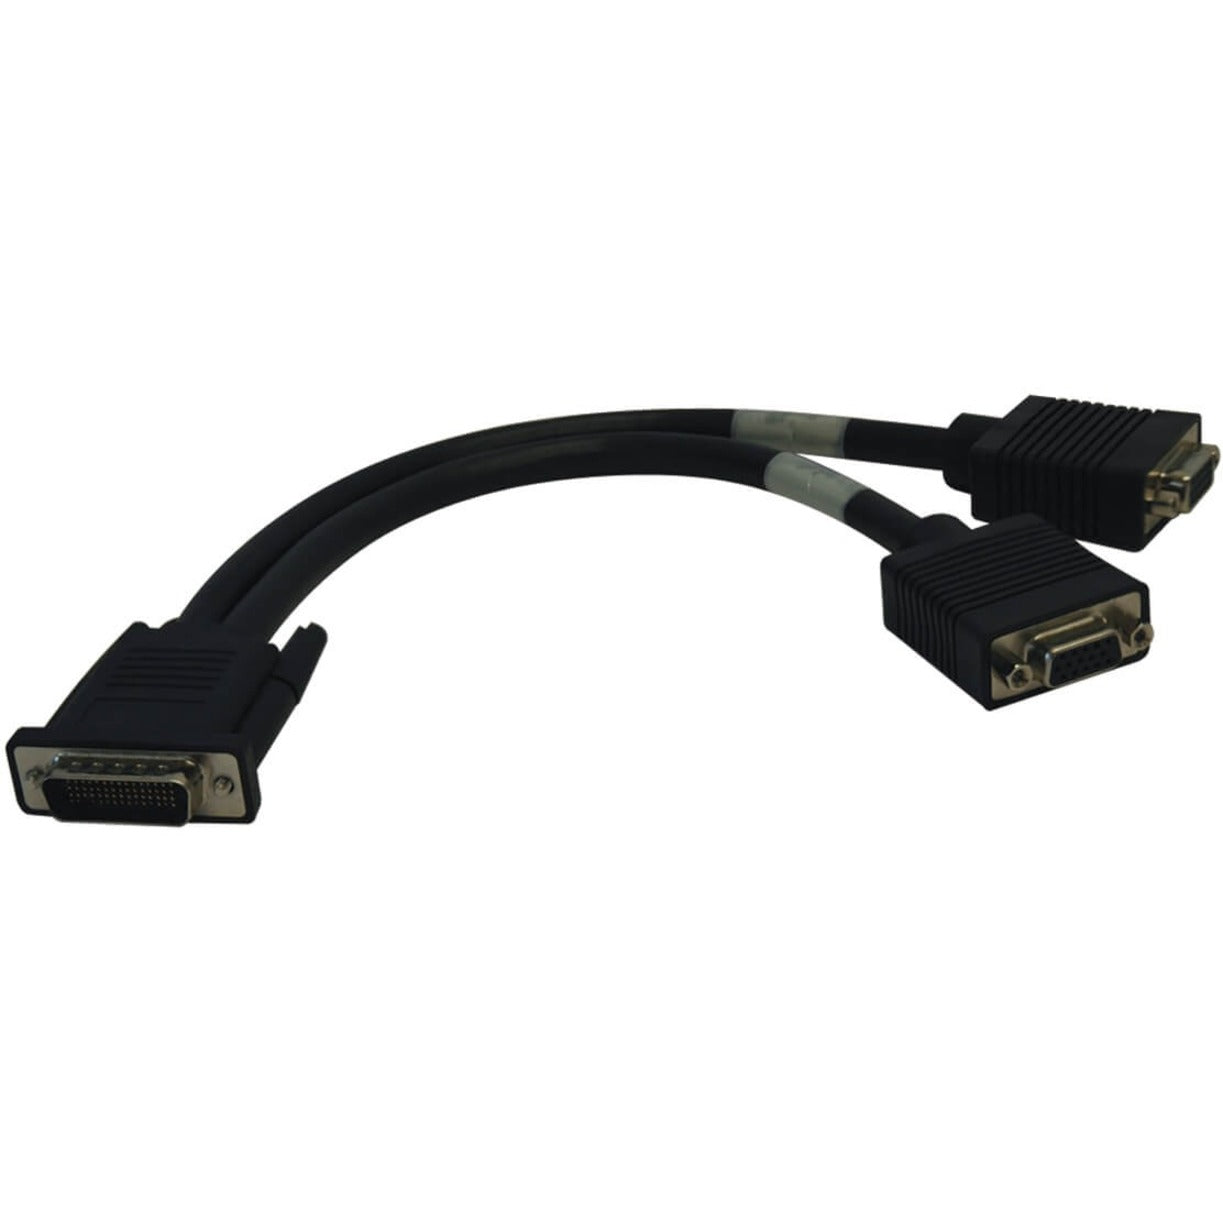 Tripp Lite P574001 DMS-59 to VGA Splitter Cable, 1ft, 2-way, Molded, Copper Conductor